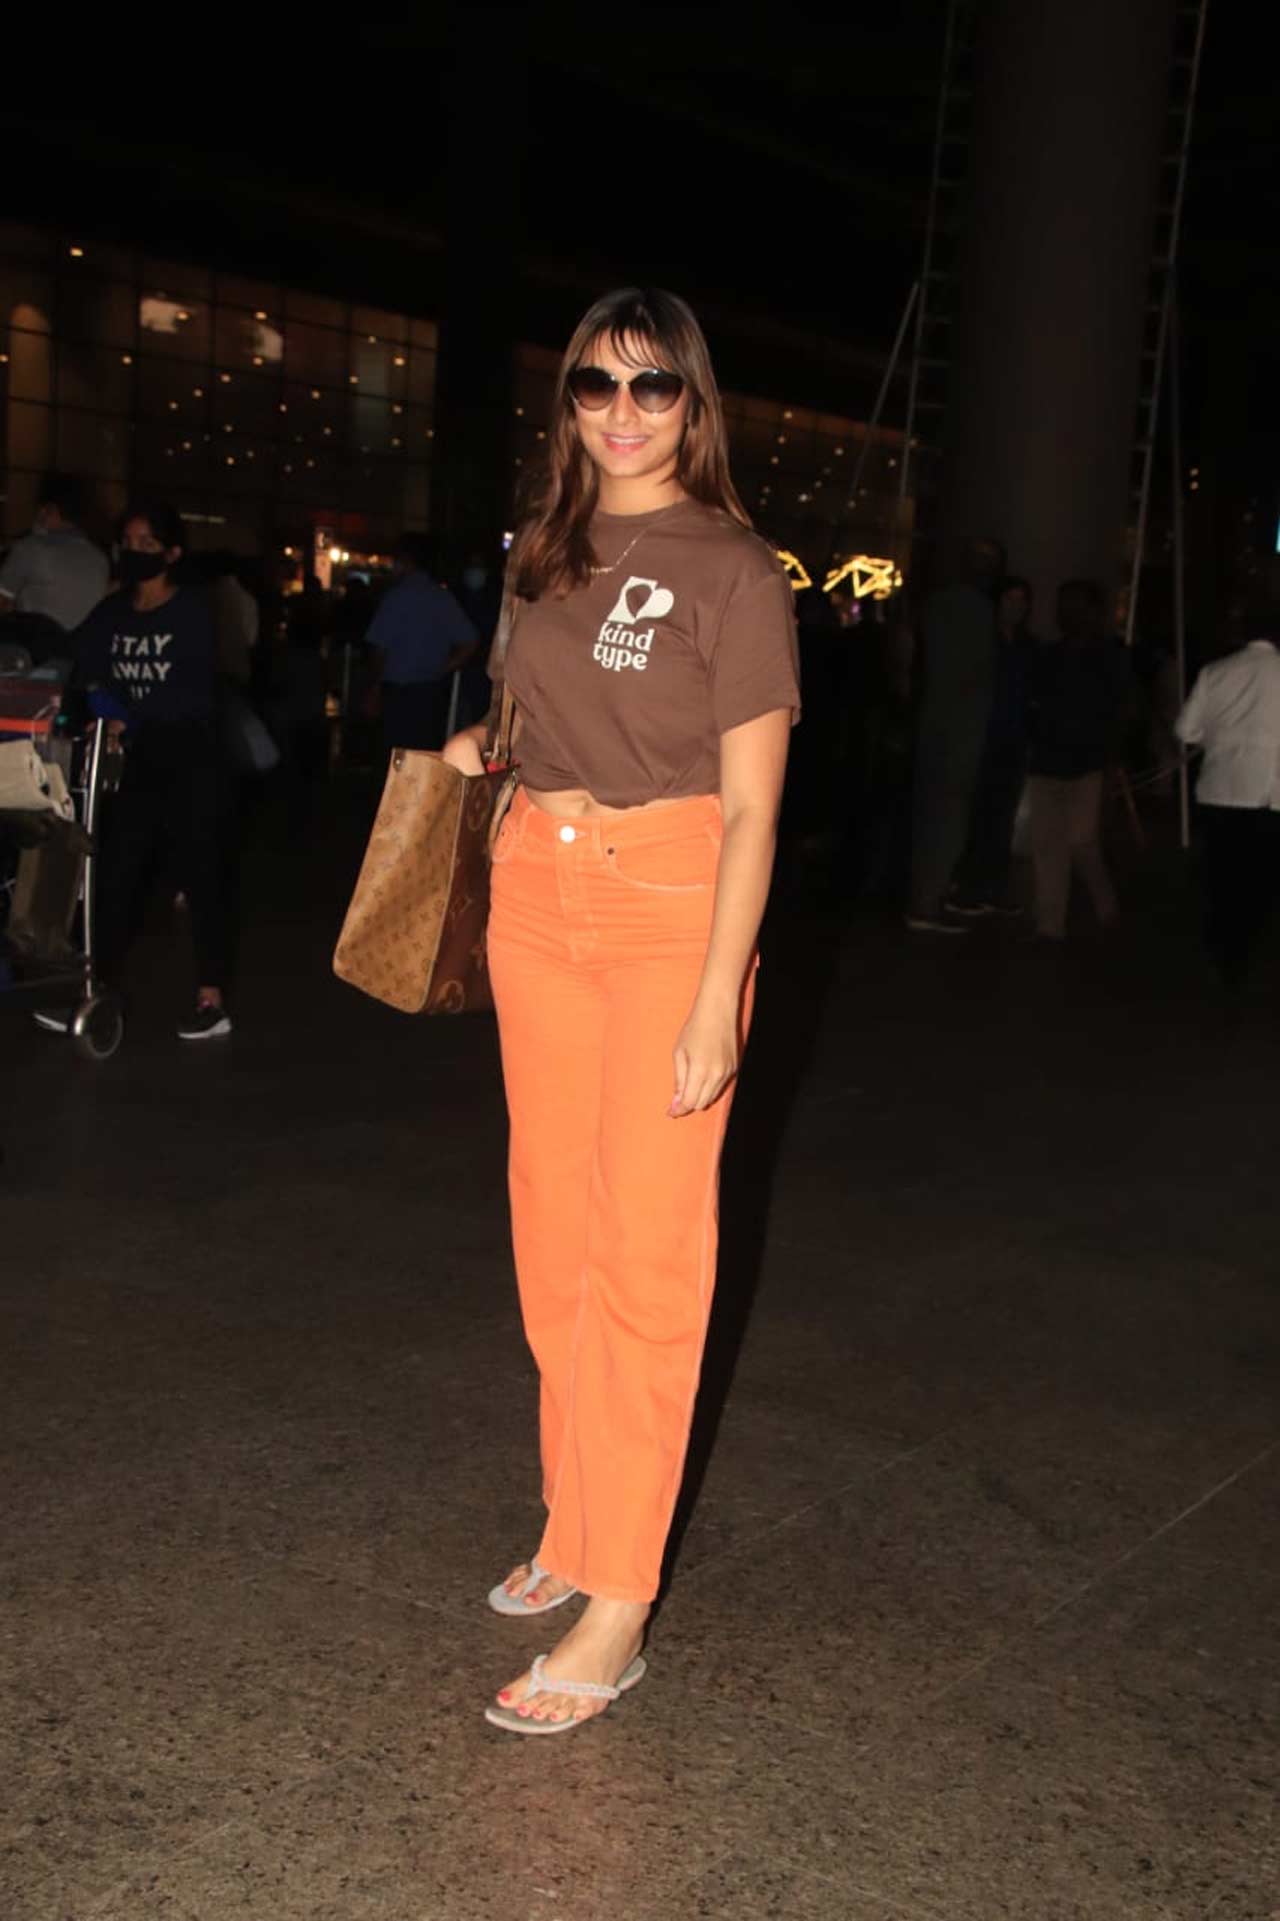 'Dabangg 3' fame Saiee Manjrekar was all smiles when snapped at the Mumbai airport. Speaking about her professional journey, Saiee will be next seen in 'Major' opposite Adivi Sesh.